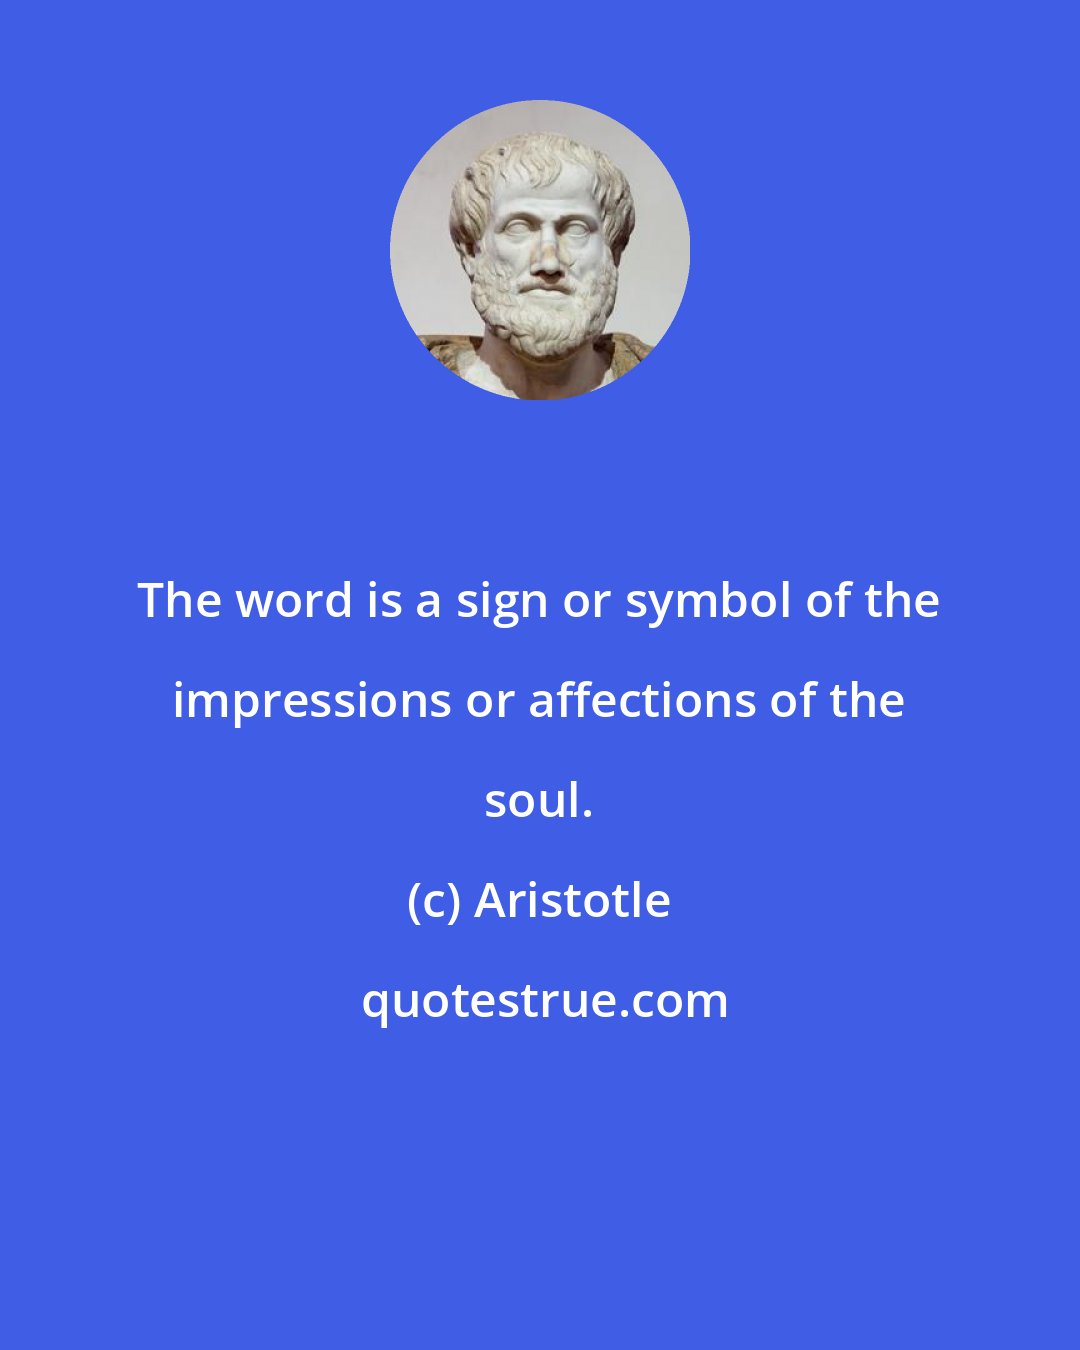 Aristotle: The word is a sign or symbol of the impressions or affections of the soul.